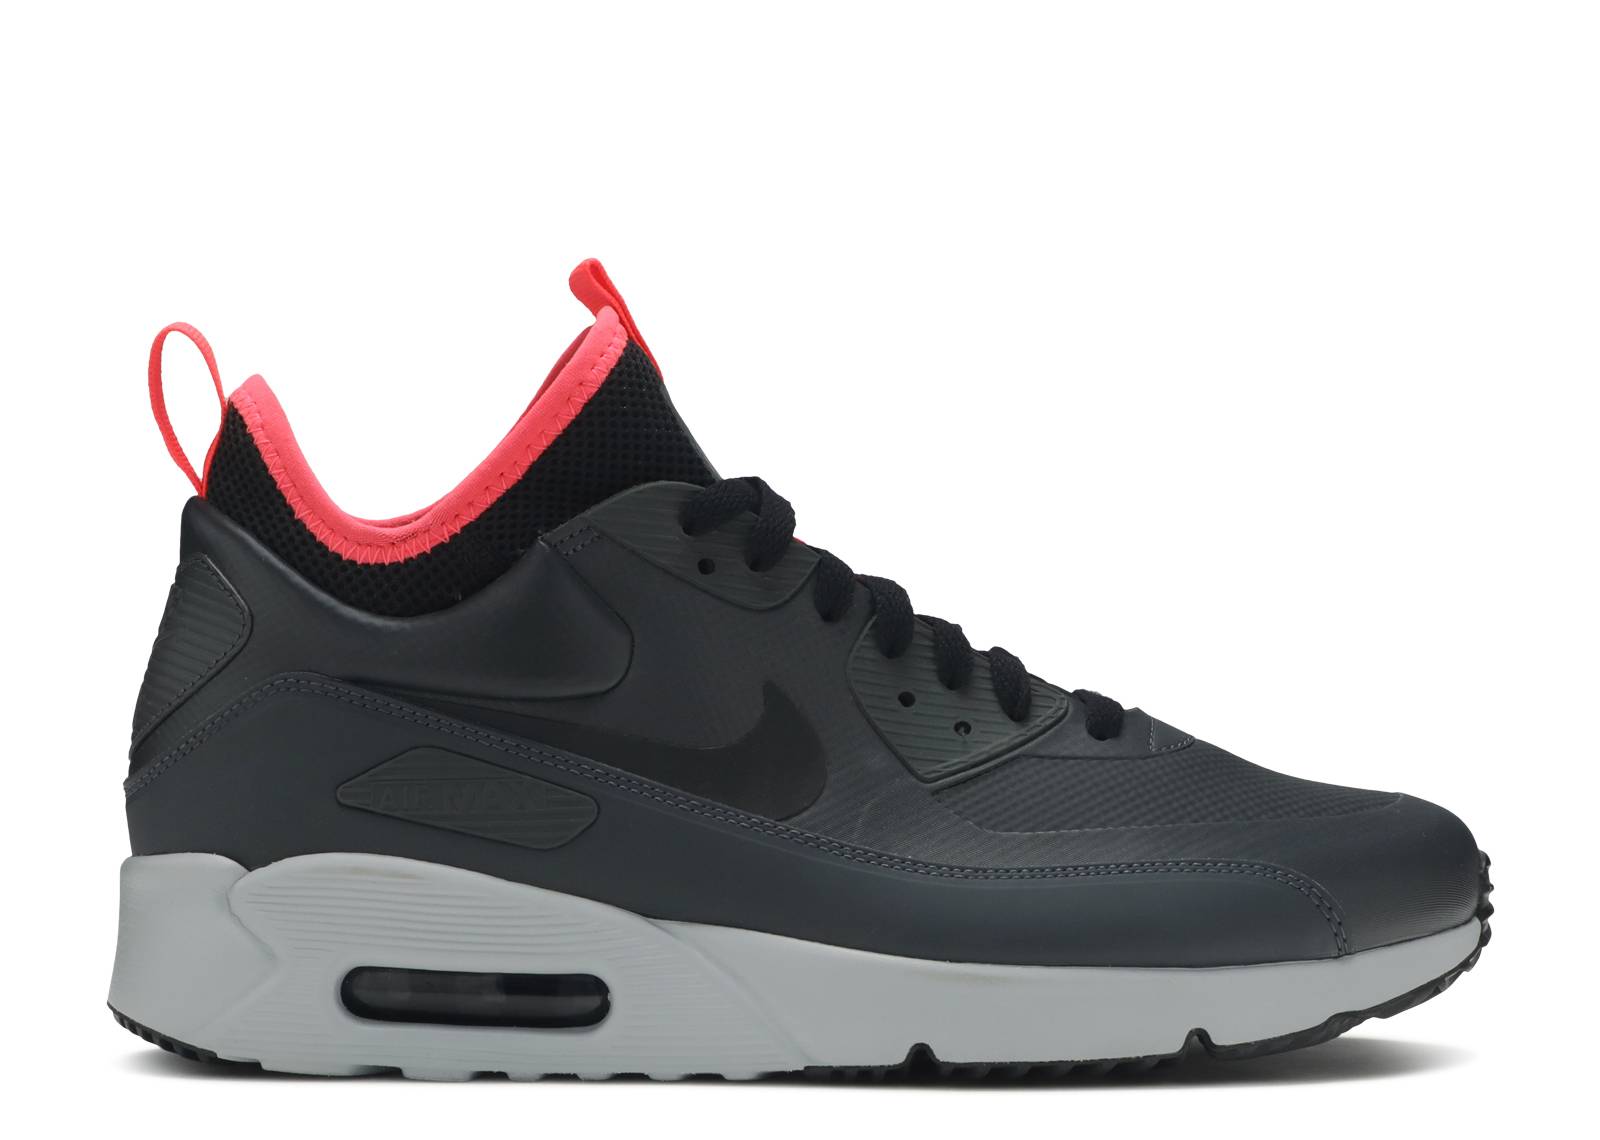 Air Max 90 Ultra Mid Winter 'Anthracite'